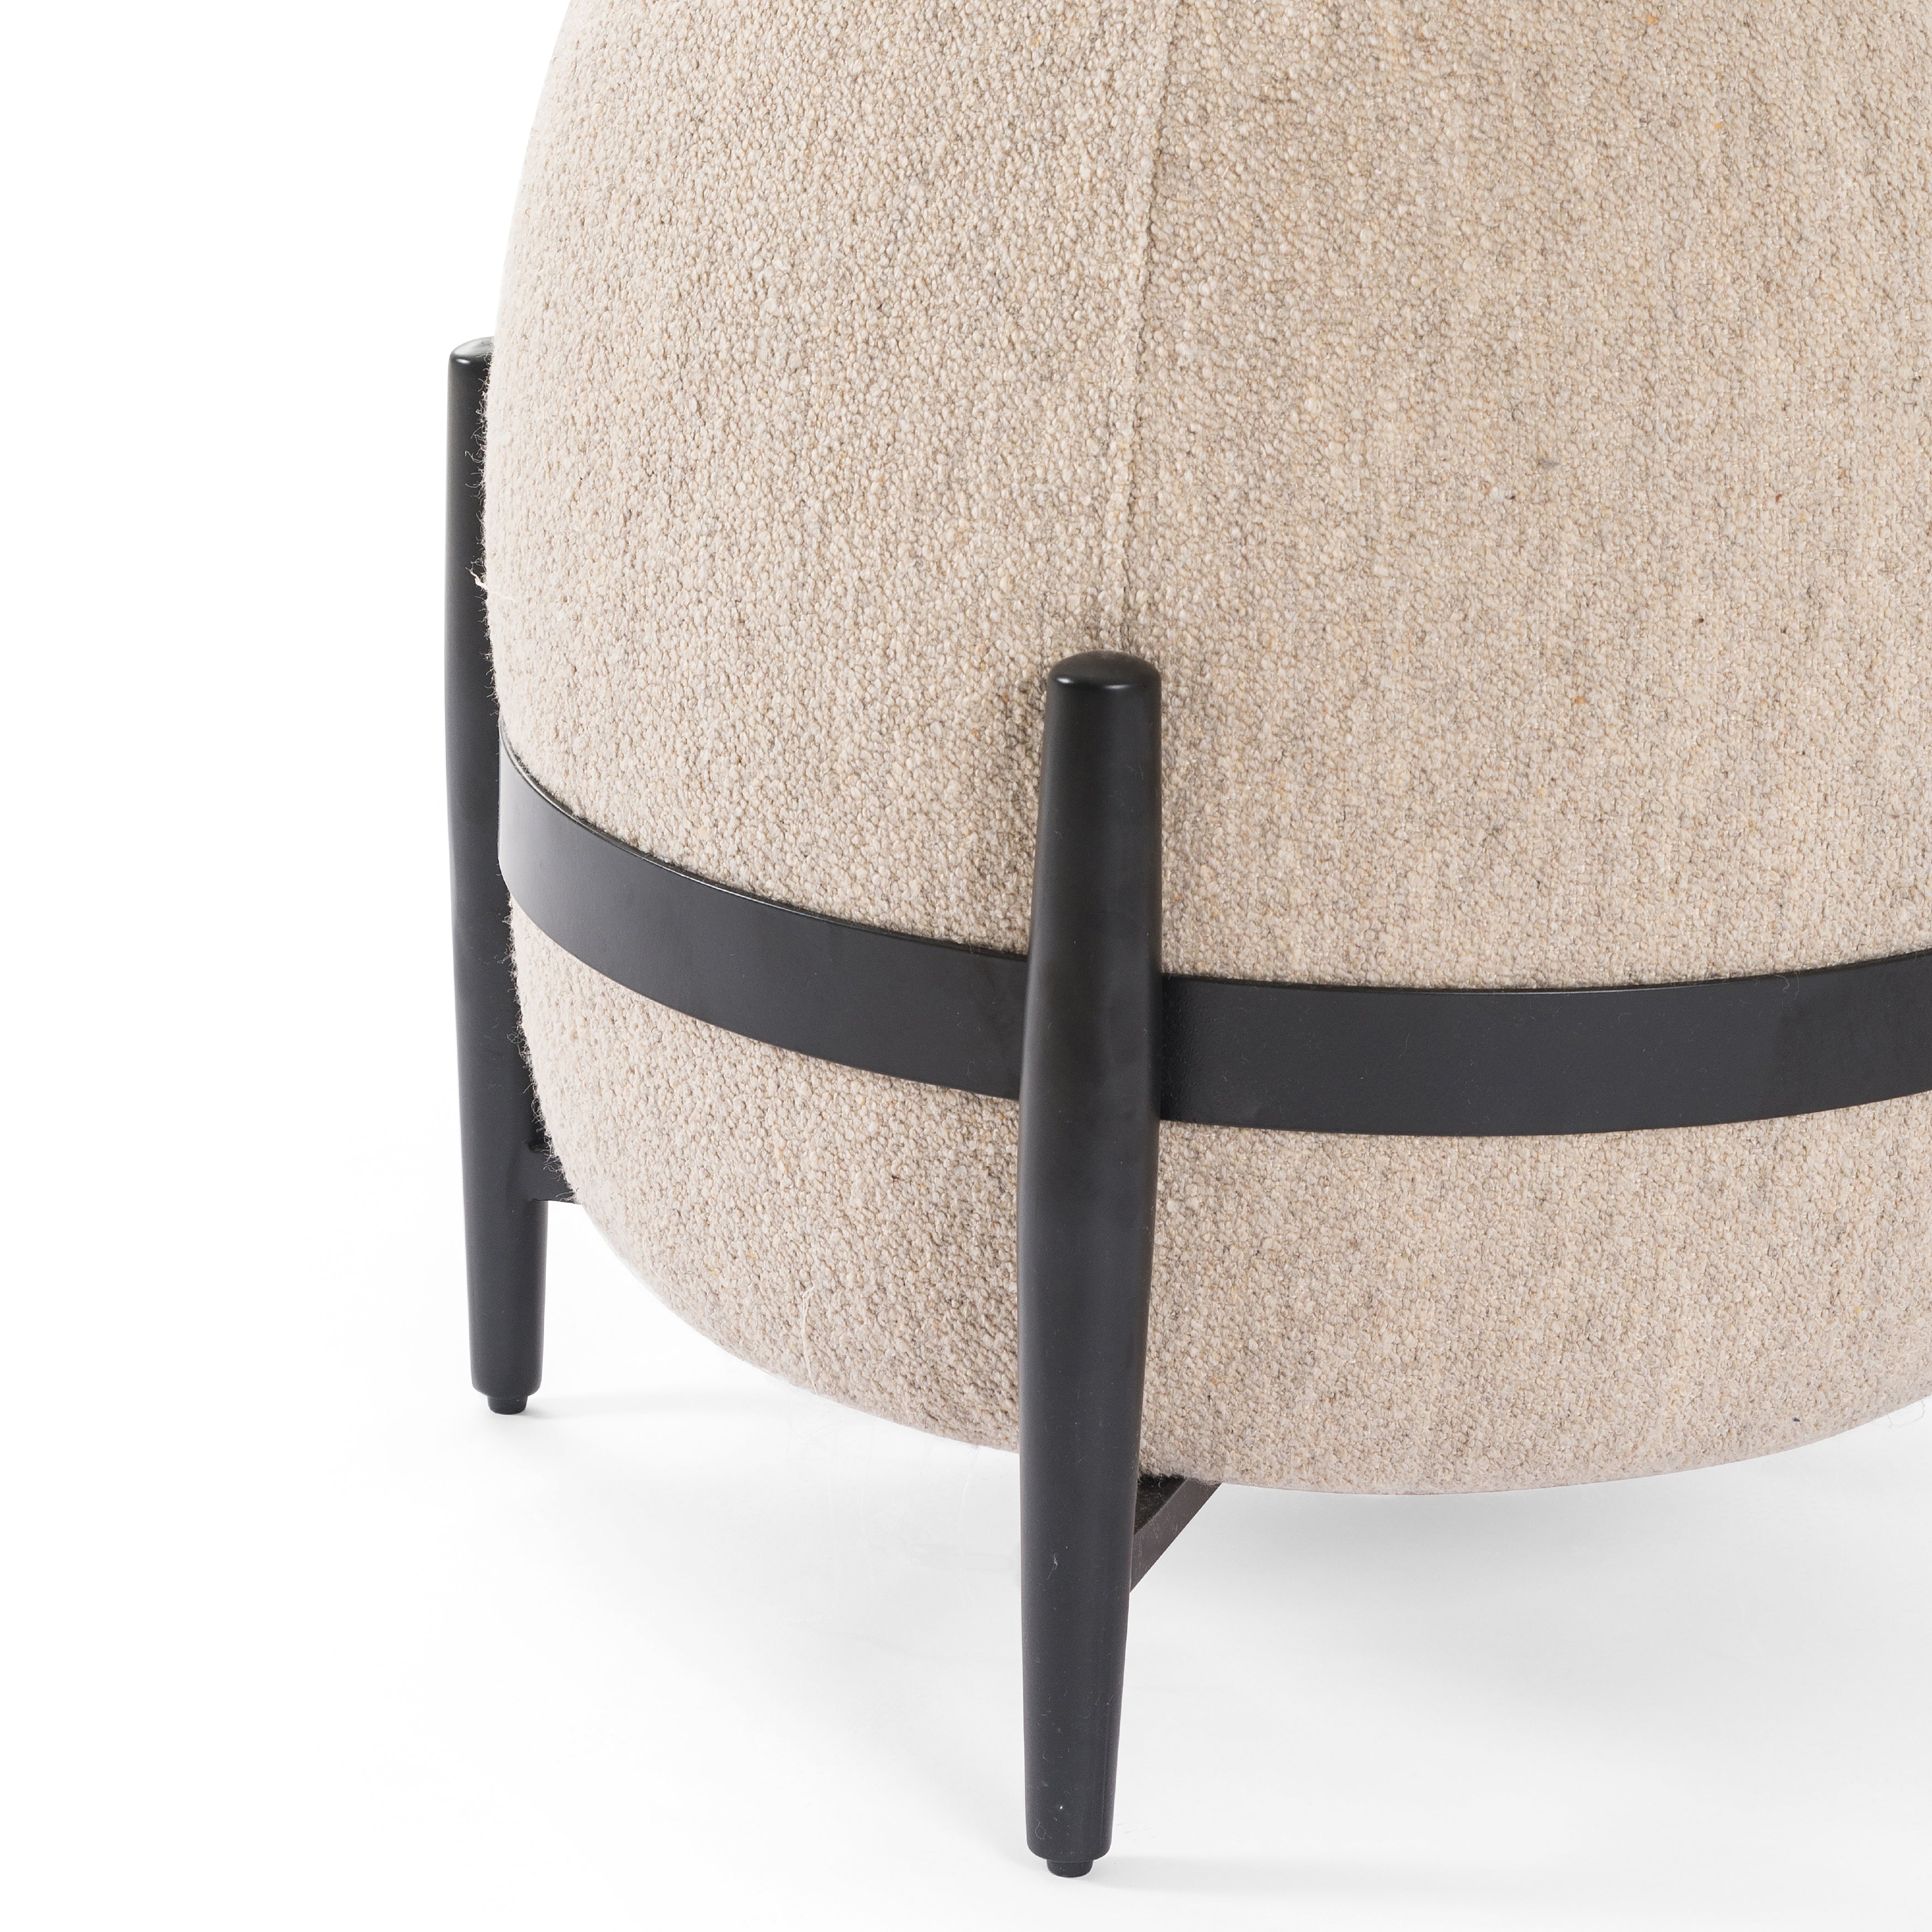 The Sia Athena Taupe Ottoman is beautifully shaped and perfect for relaxing on after a long day. It gives a retro, transitional look. Amethyst Home provides interior design services, furniture, rugs, and lighting in the Omaha metro area.